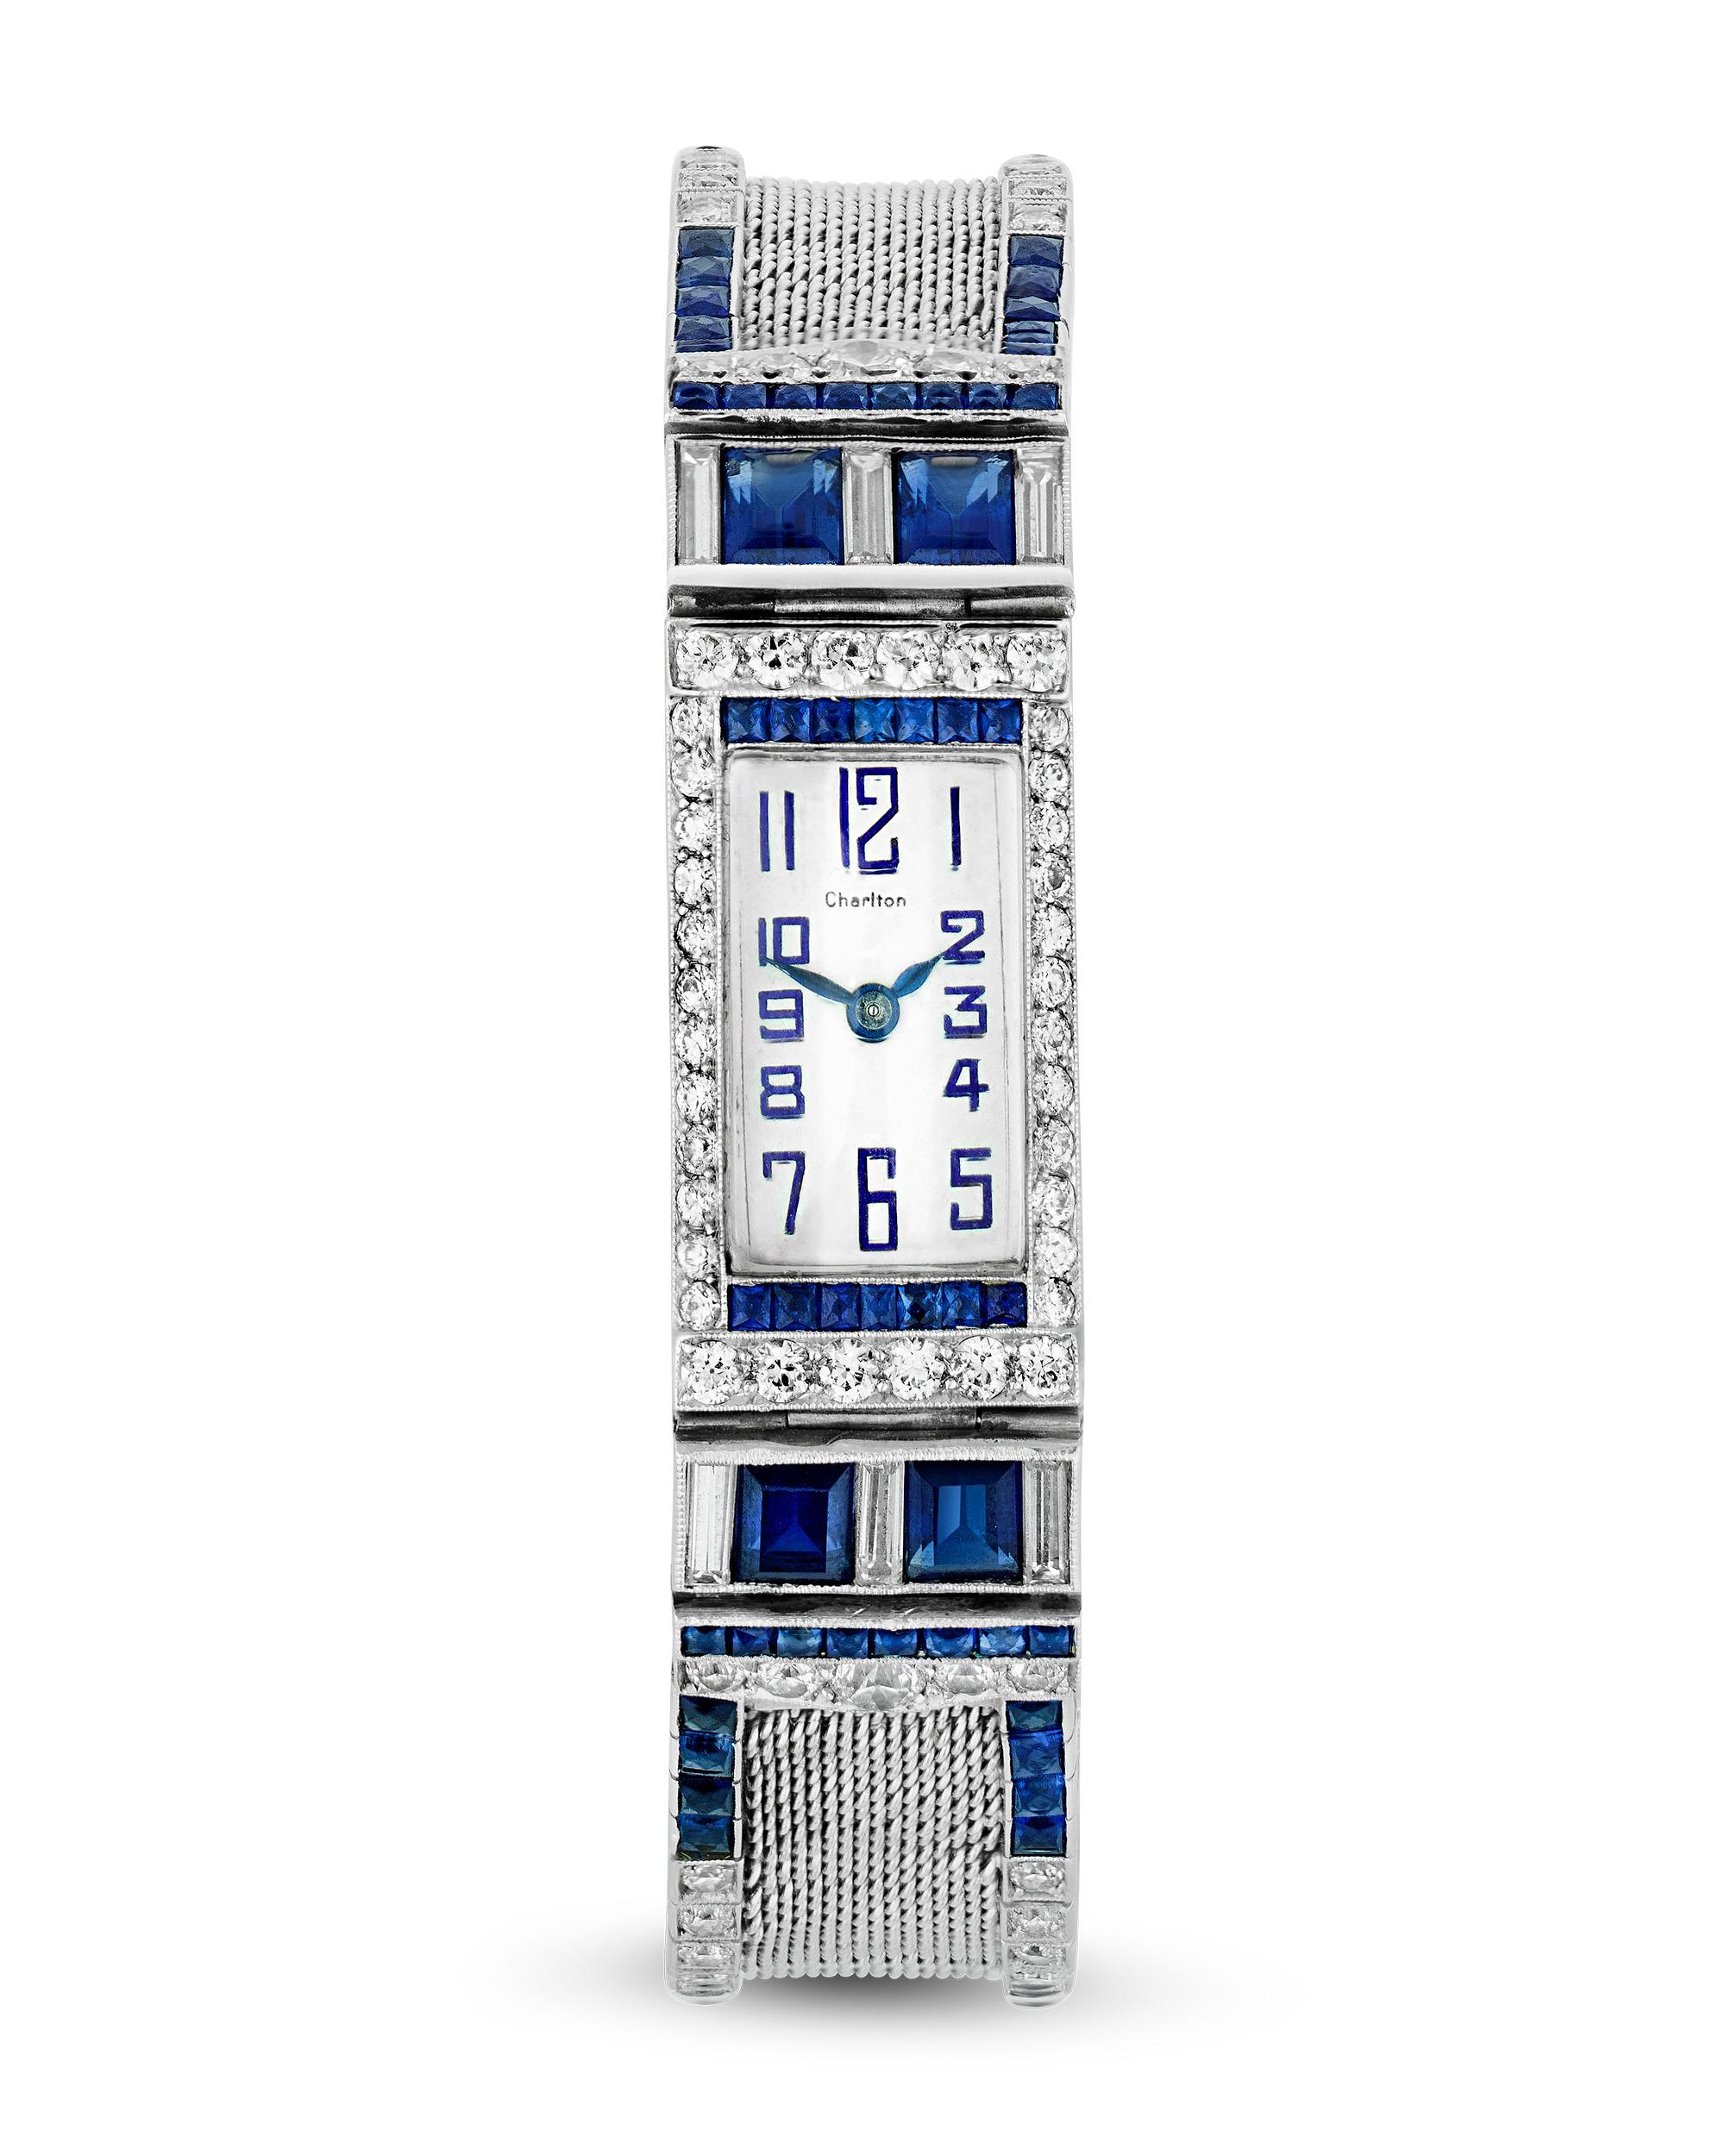 Showcasing the quintessential elegance and geometric grace of the Art Deco period, this timepiece was crafted by renowned watchmaker Patek Philippe for the Deco-era jeweler Charlton & Co. The elegant platinum mesh bracelet is set with vibrant blue